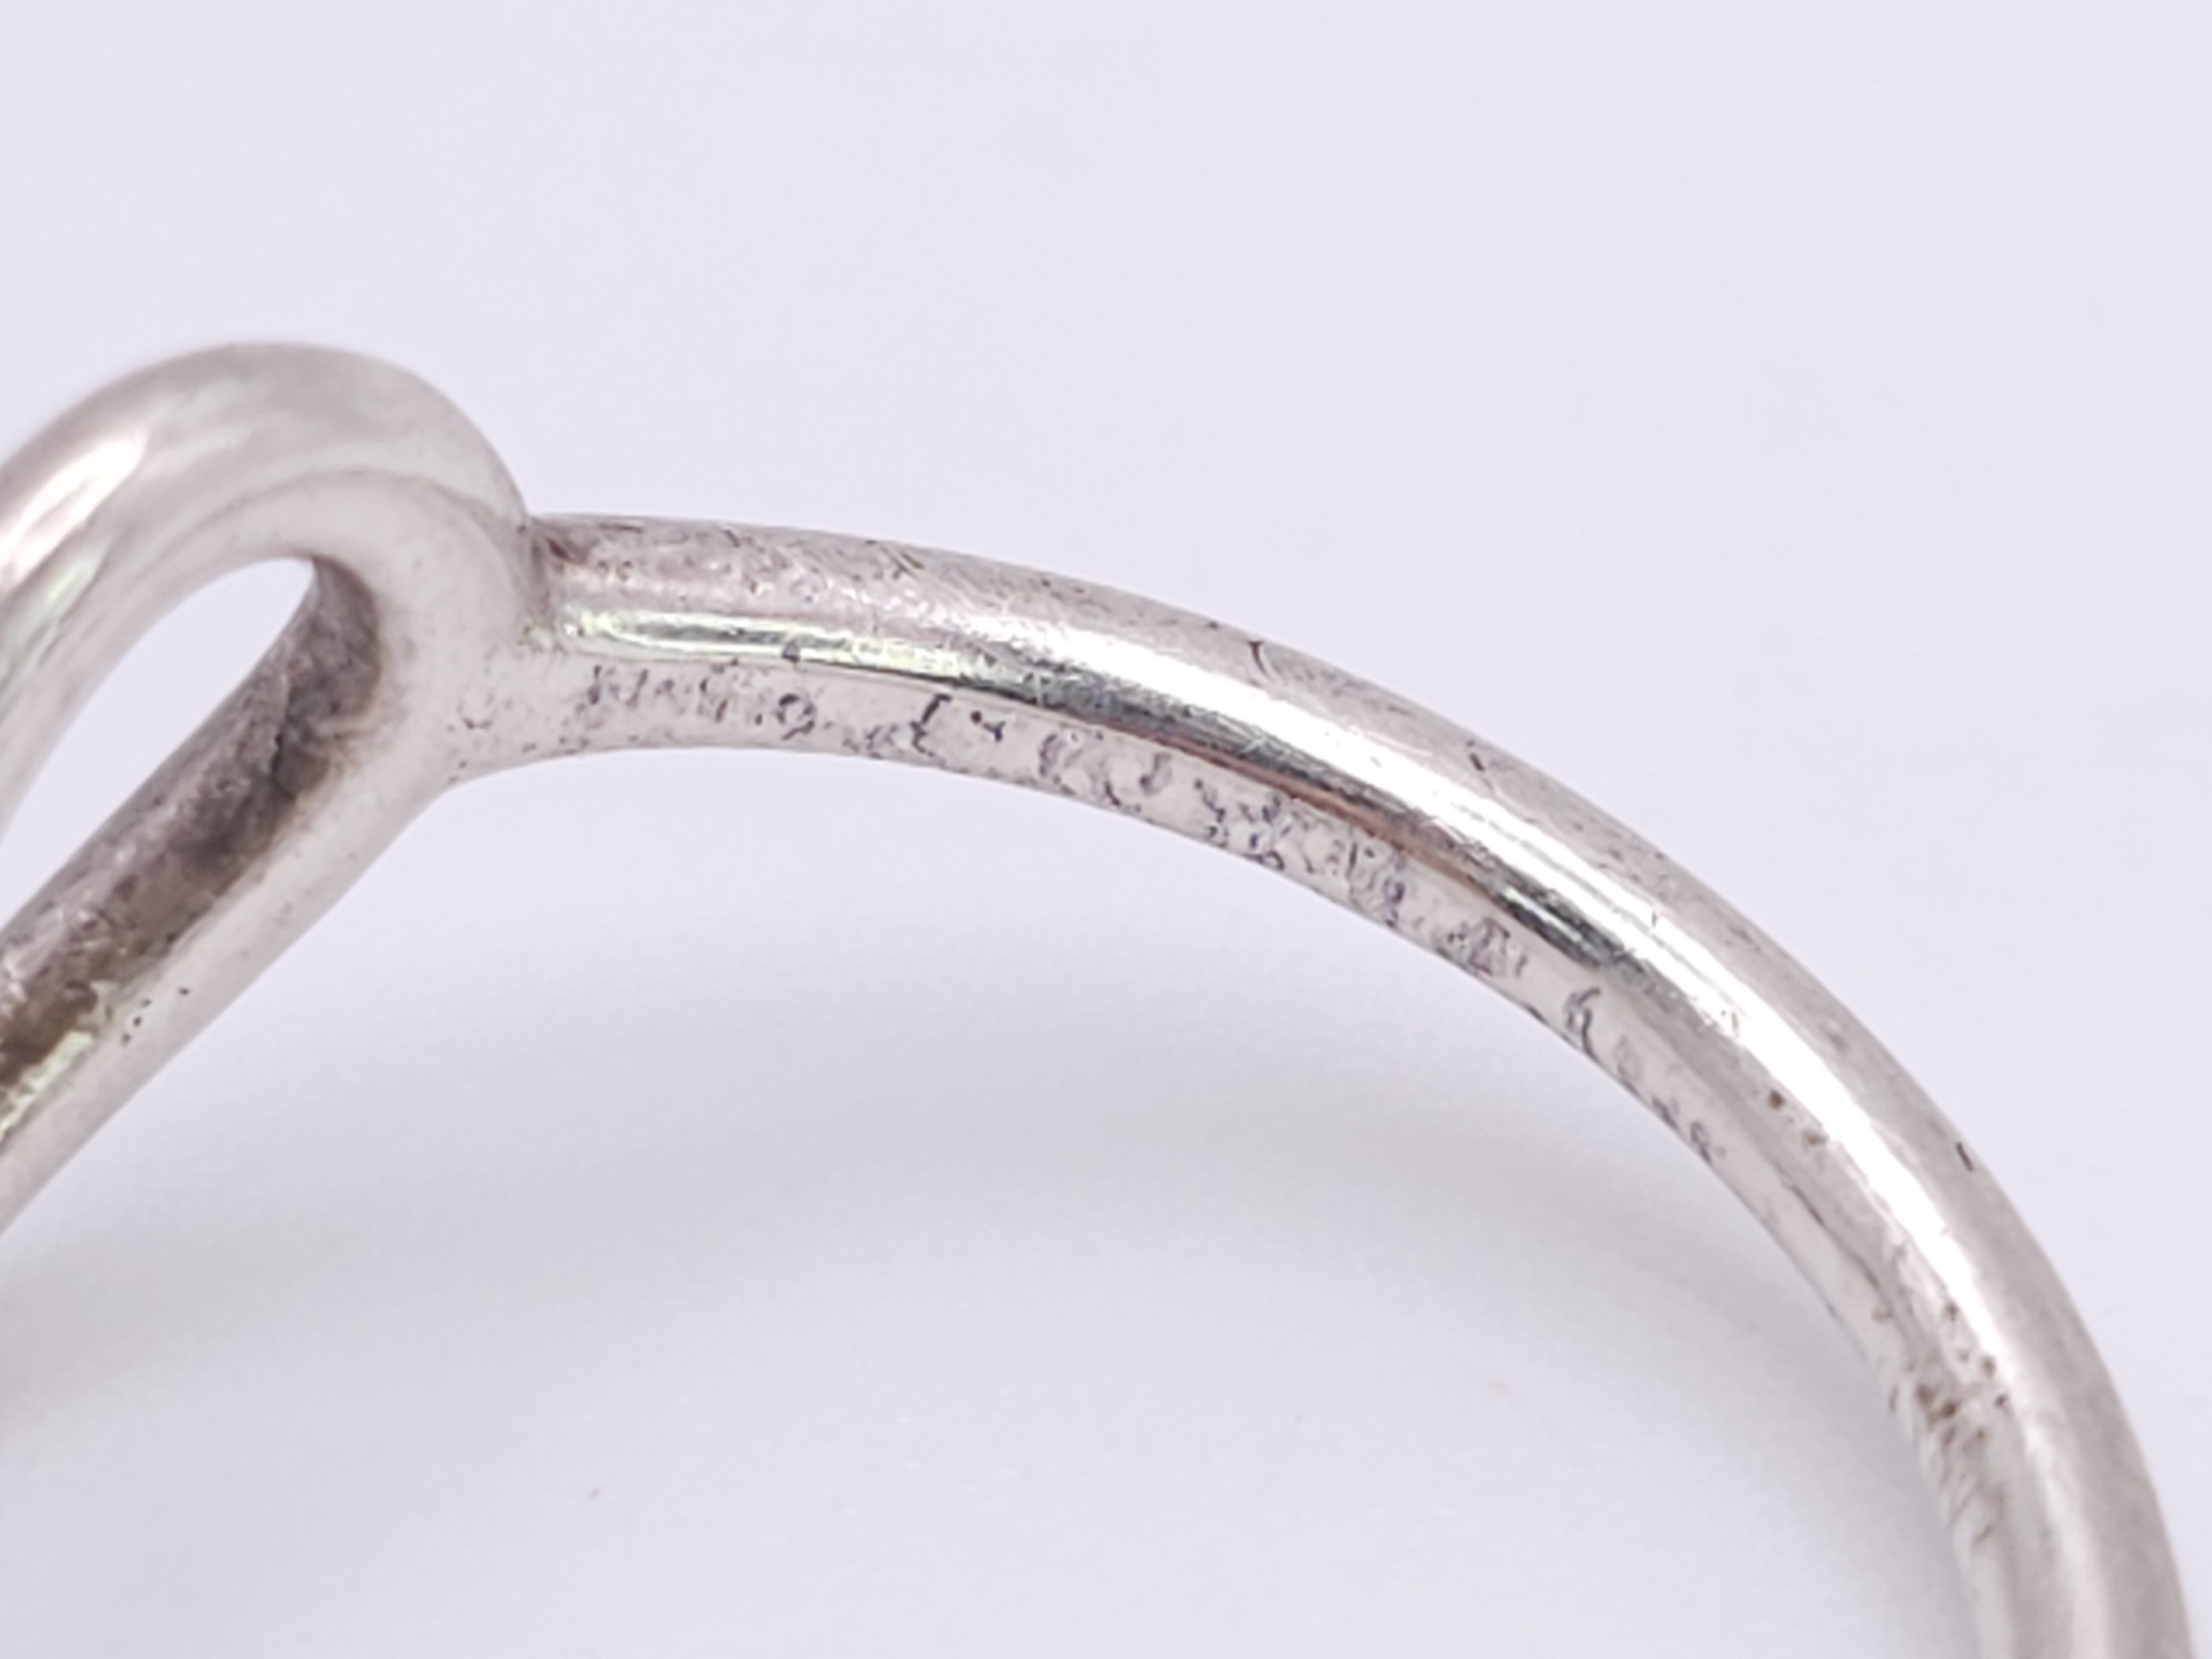 A PANDORA STERLING SILVER HEART RING. UK size N, US size 54, 2g weight. Ref: SC 8087 - Image 6 of 7